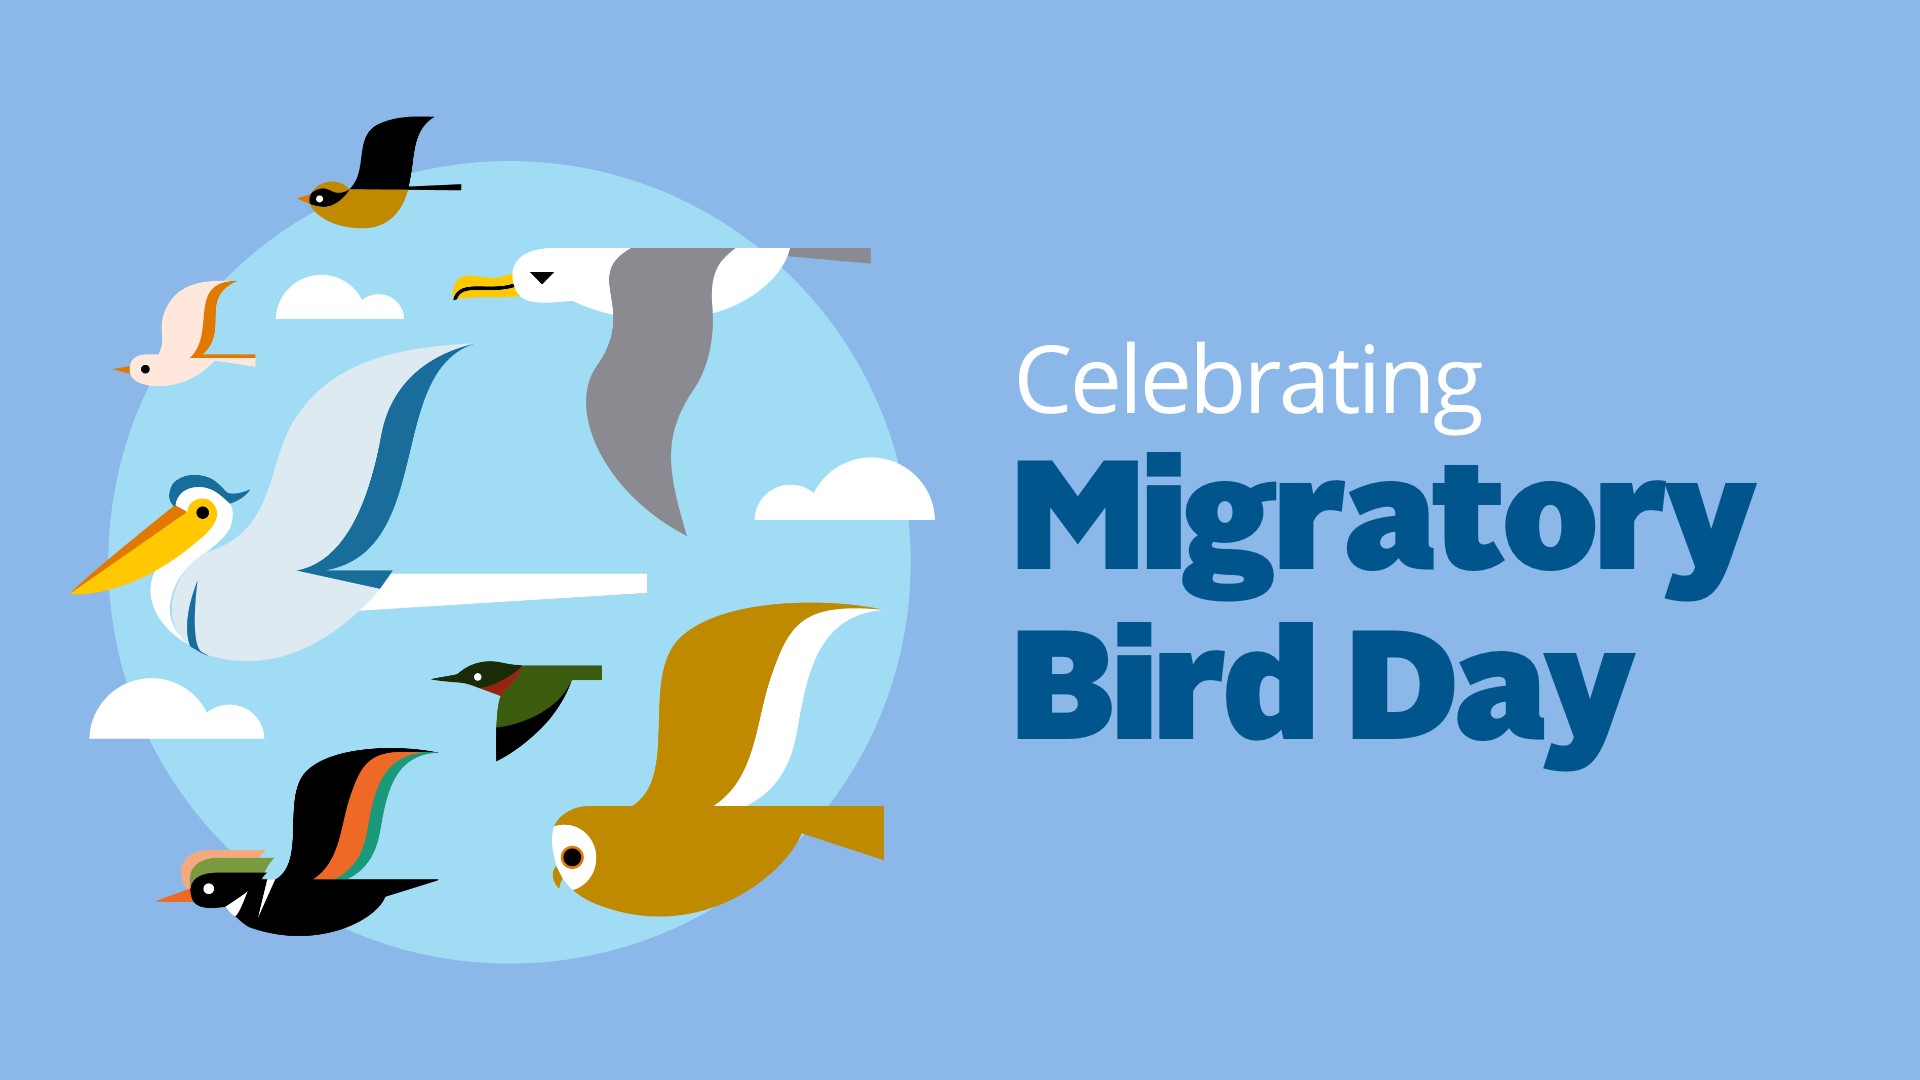 illustration of birds flying with the words "celebrating migratory bird day" to the right